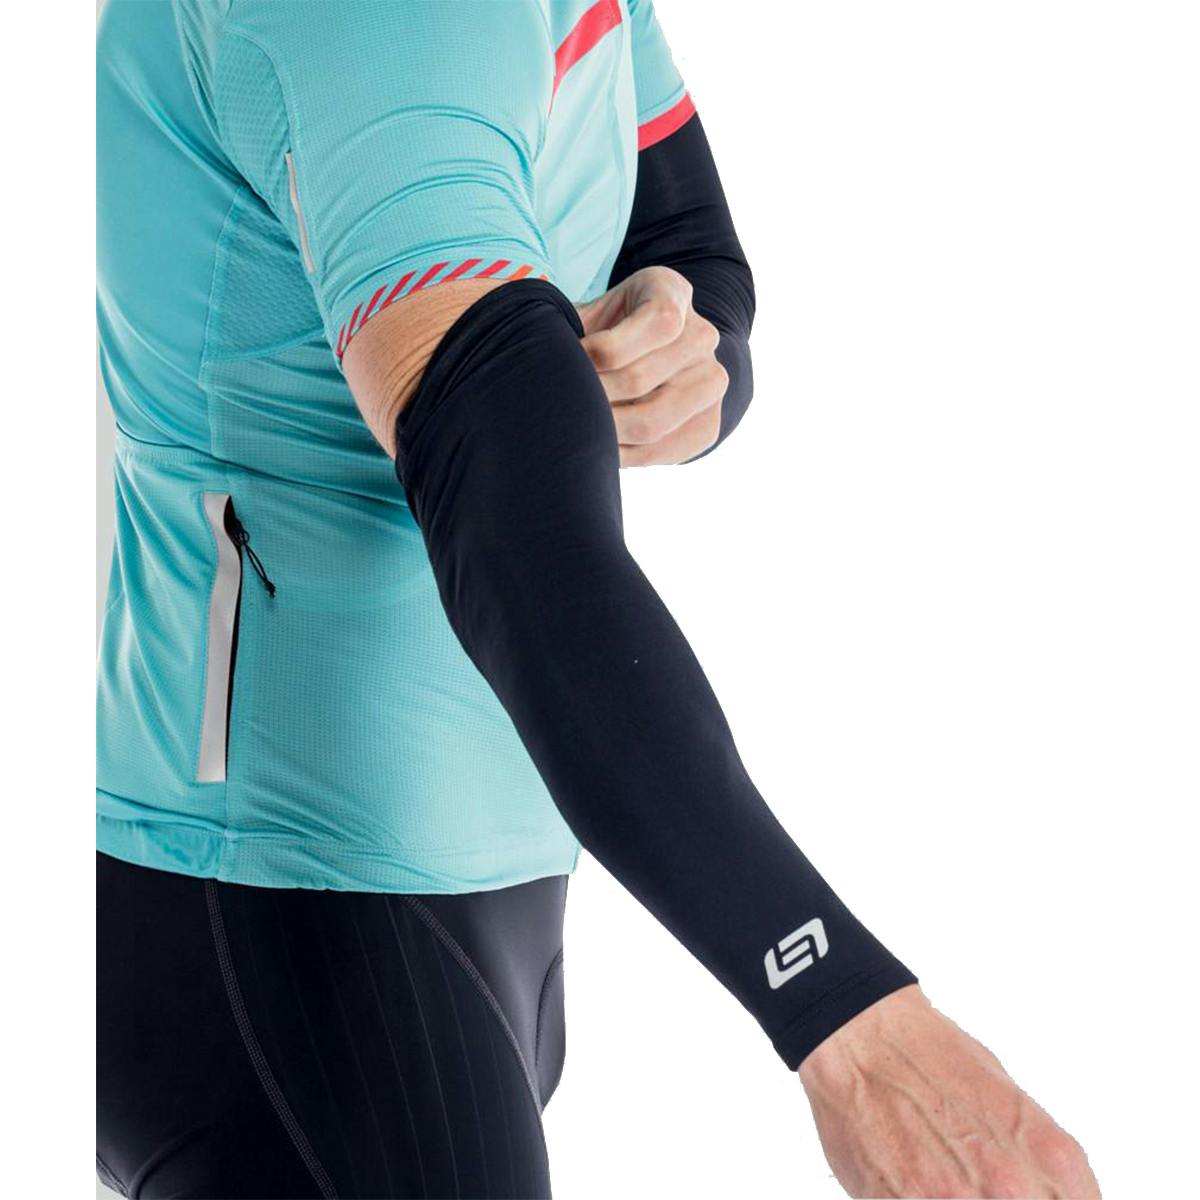 Bellwether Thermaldress Arm Warmers - Black - XS